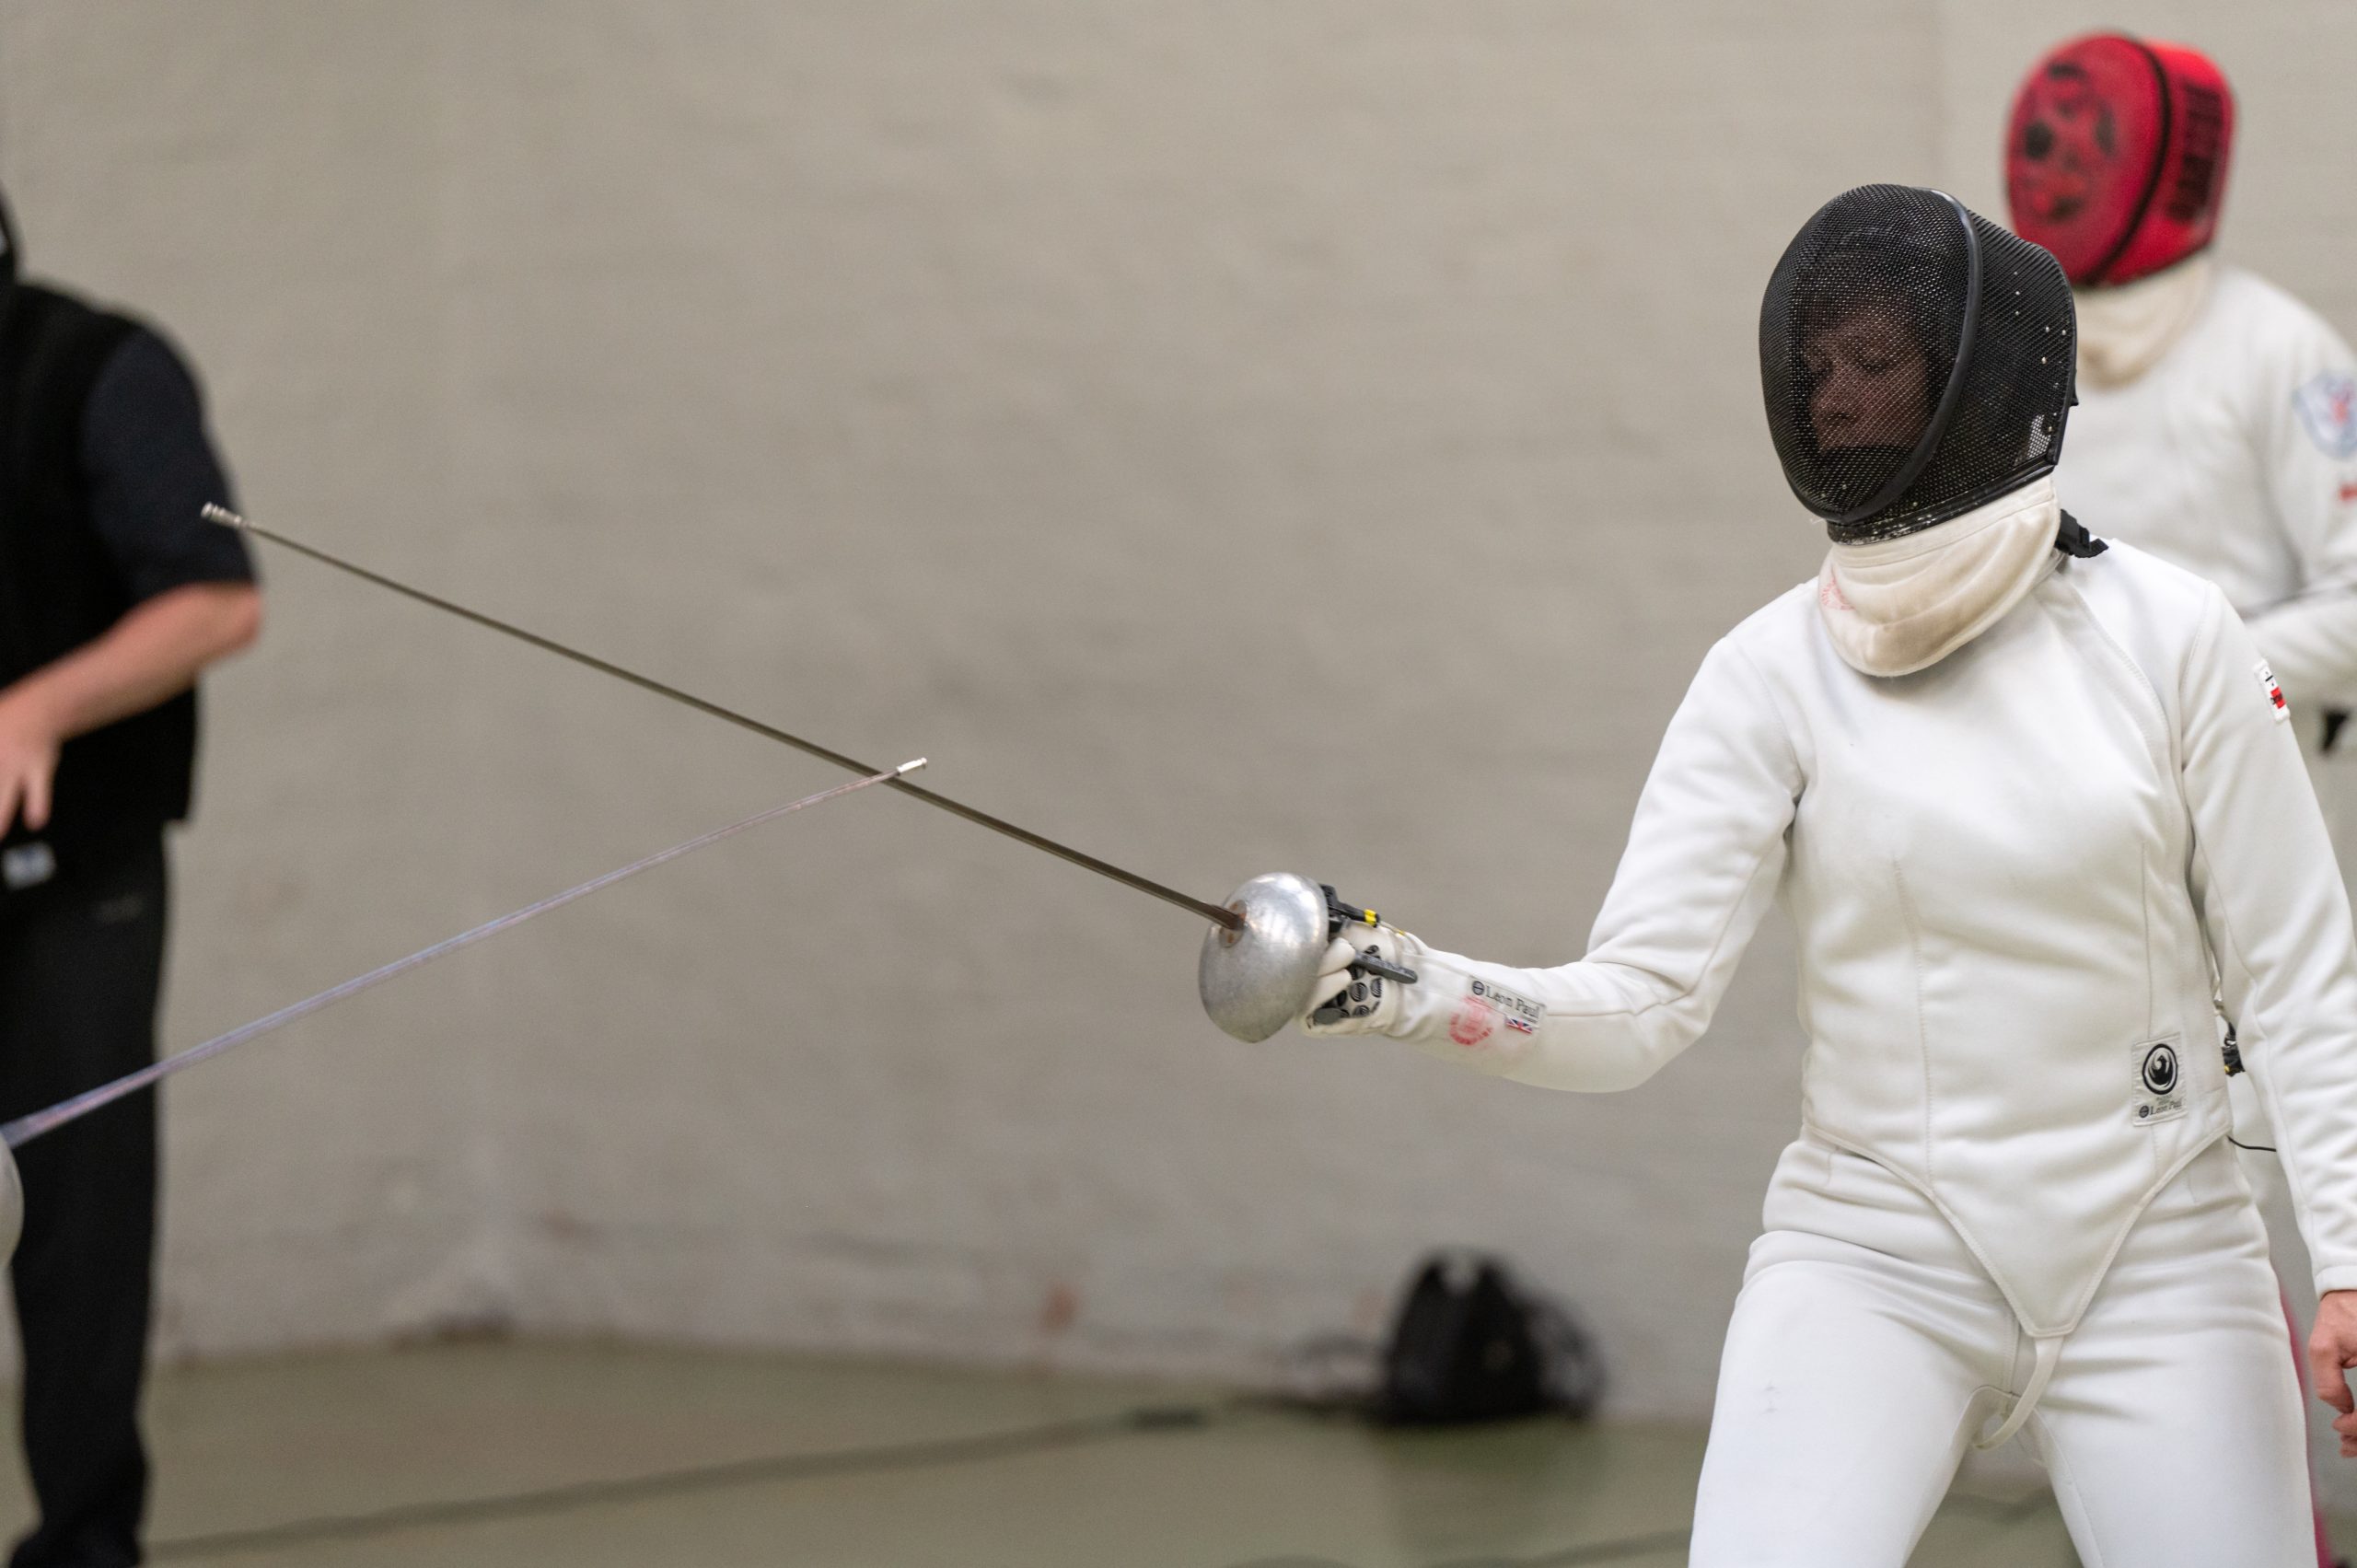 White woman aged 30 to 40 fencing